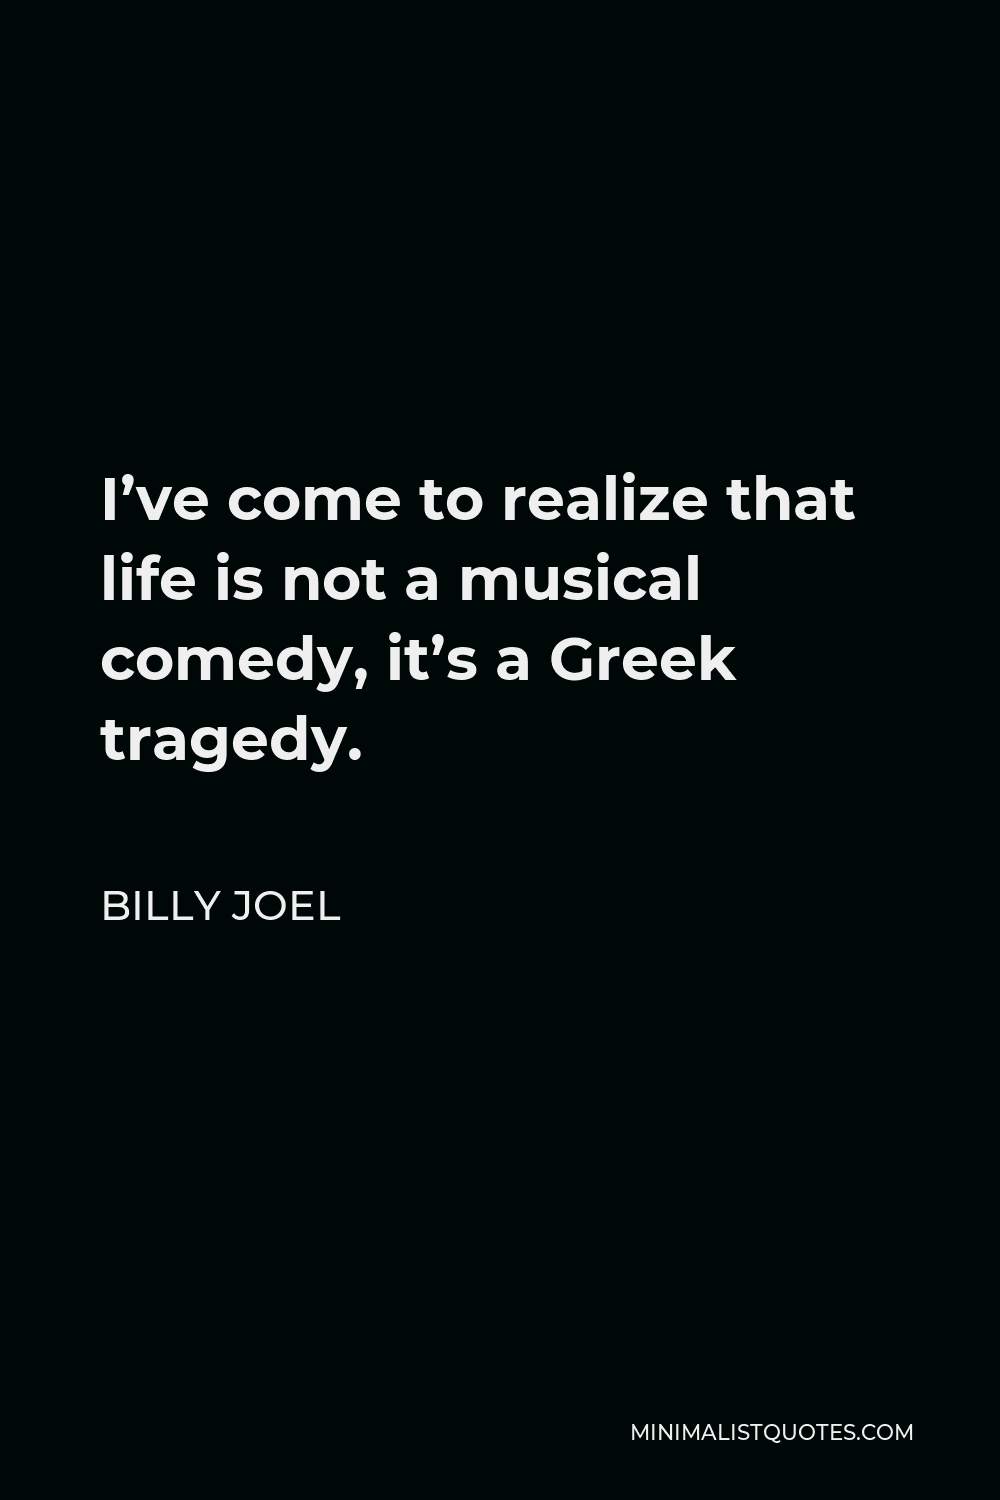 Billy Joel Quote - I’ve come to realize that life is not a musical comedy, it’s a Greek tragedy.